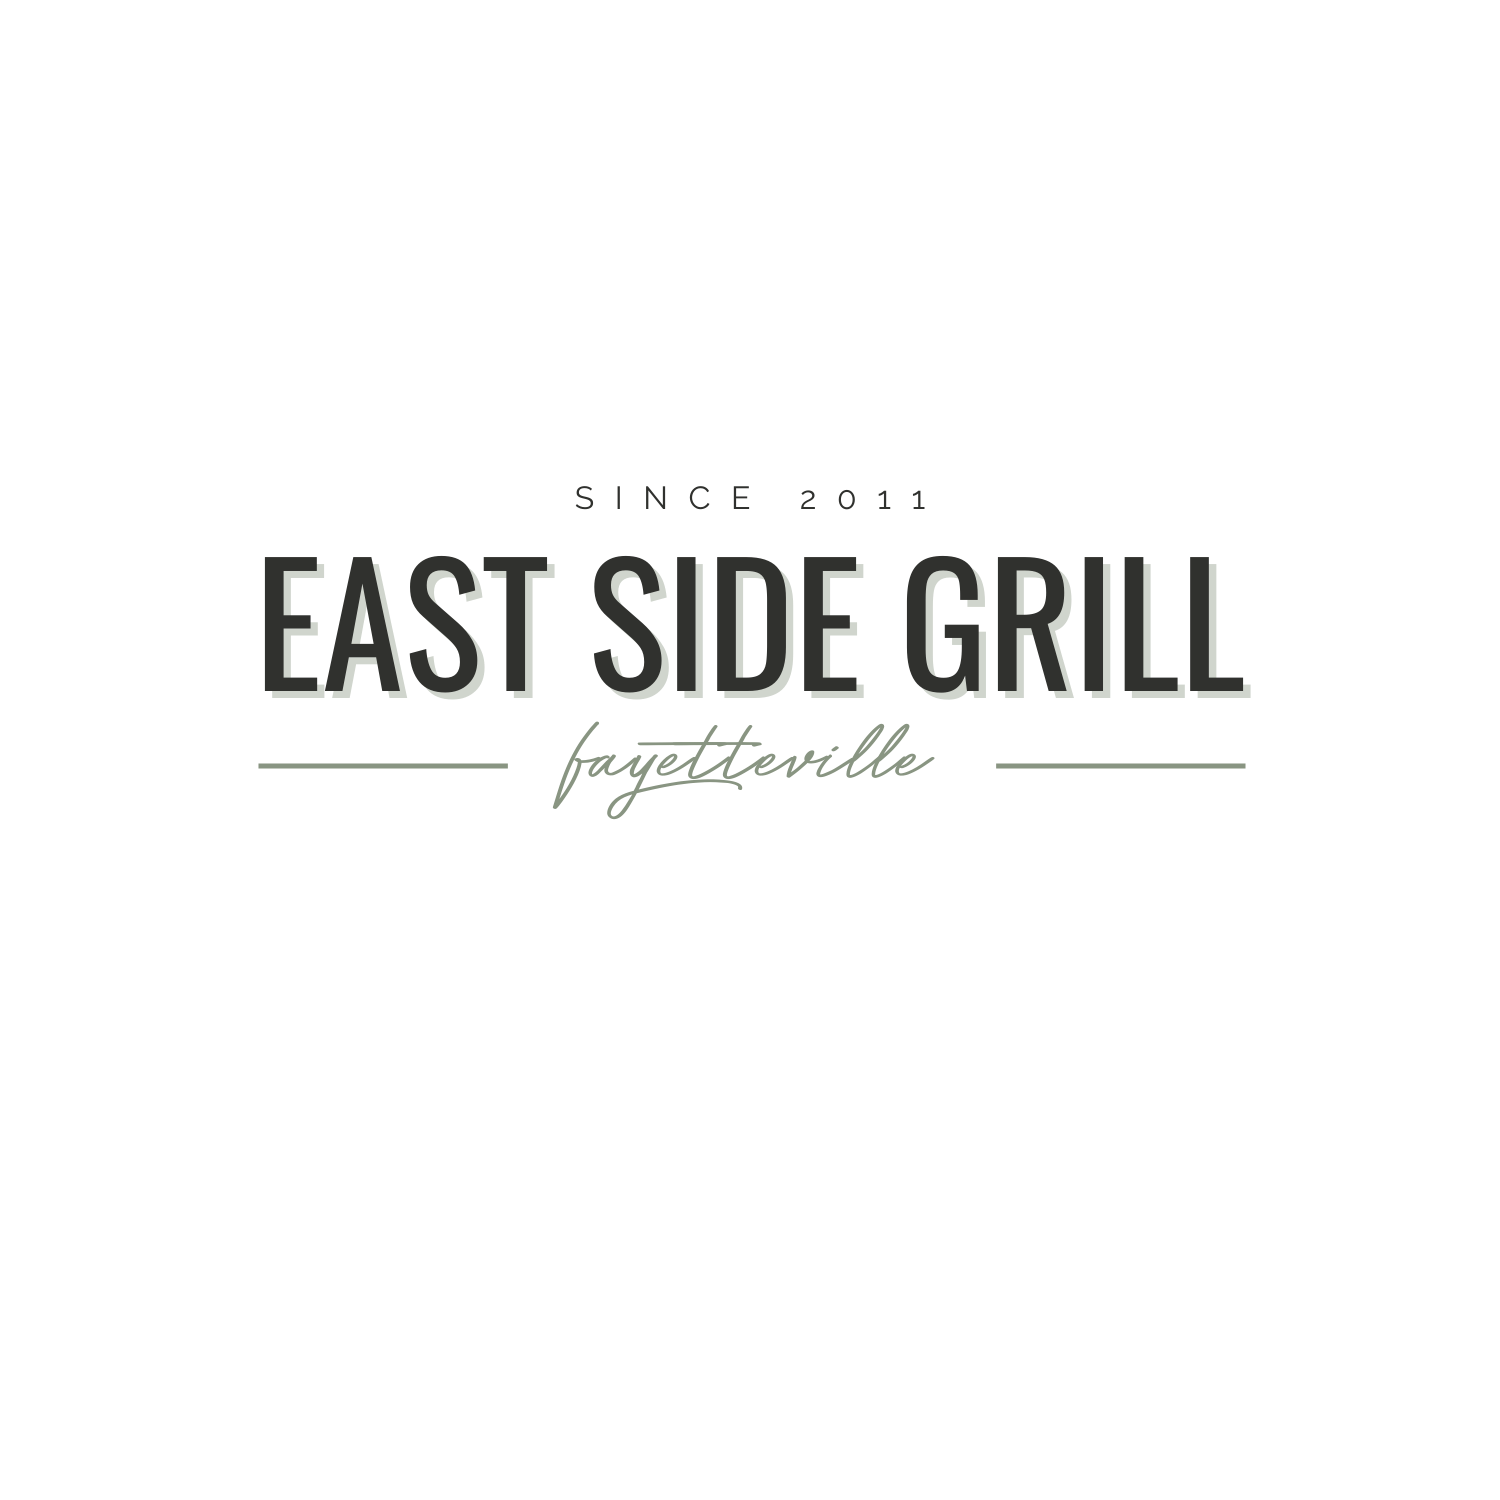 East Side Grill